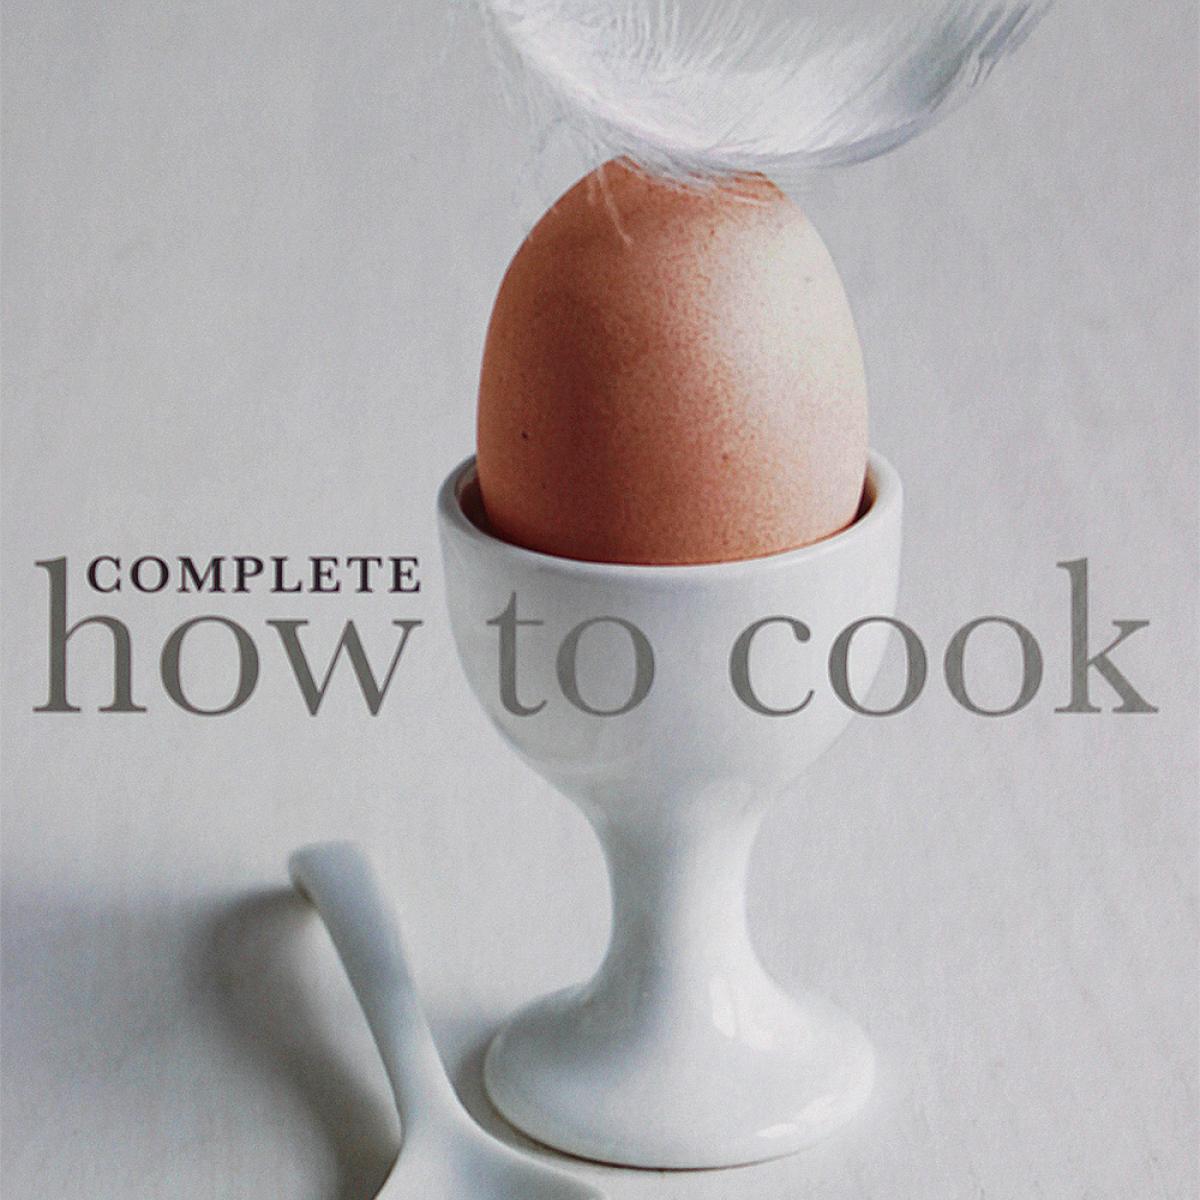 A picture of Delia's Complete How to Cook